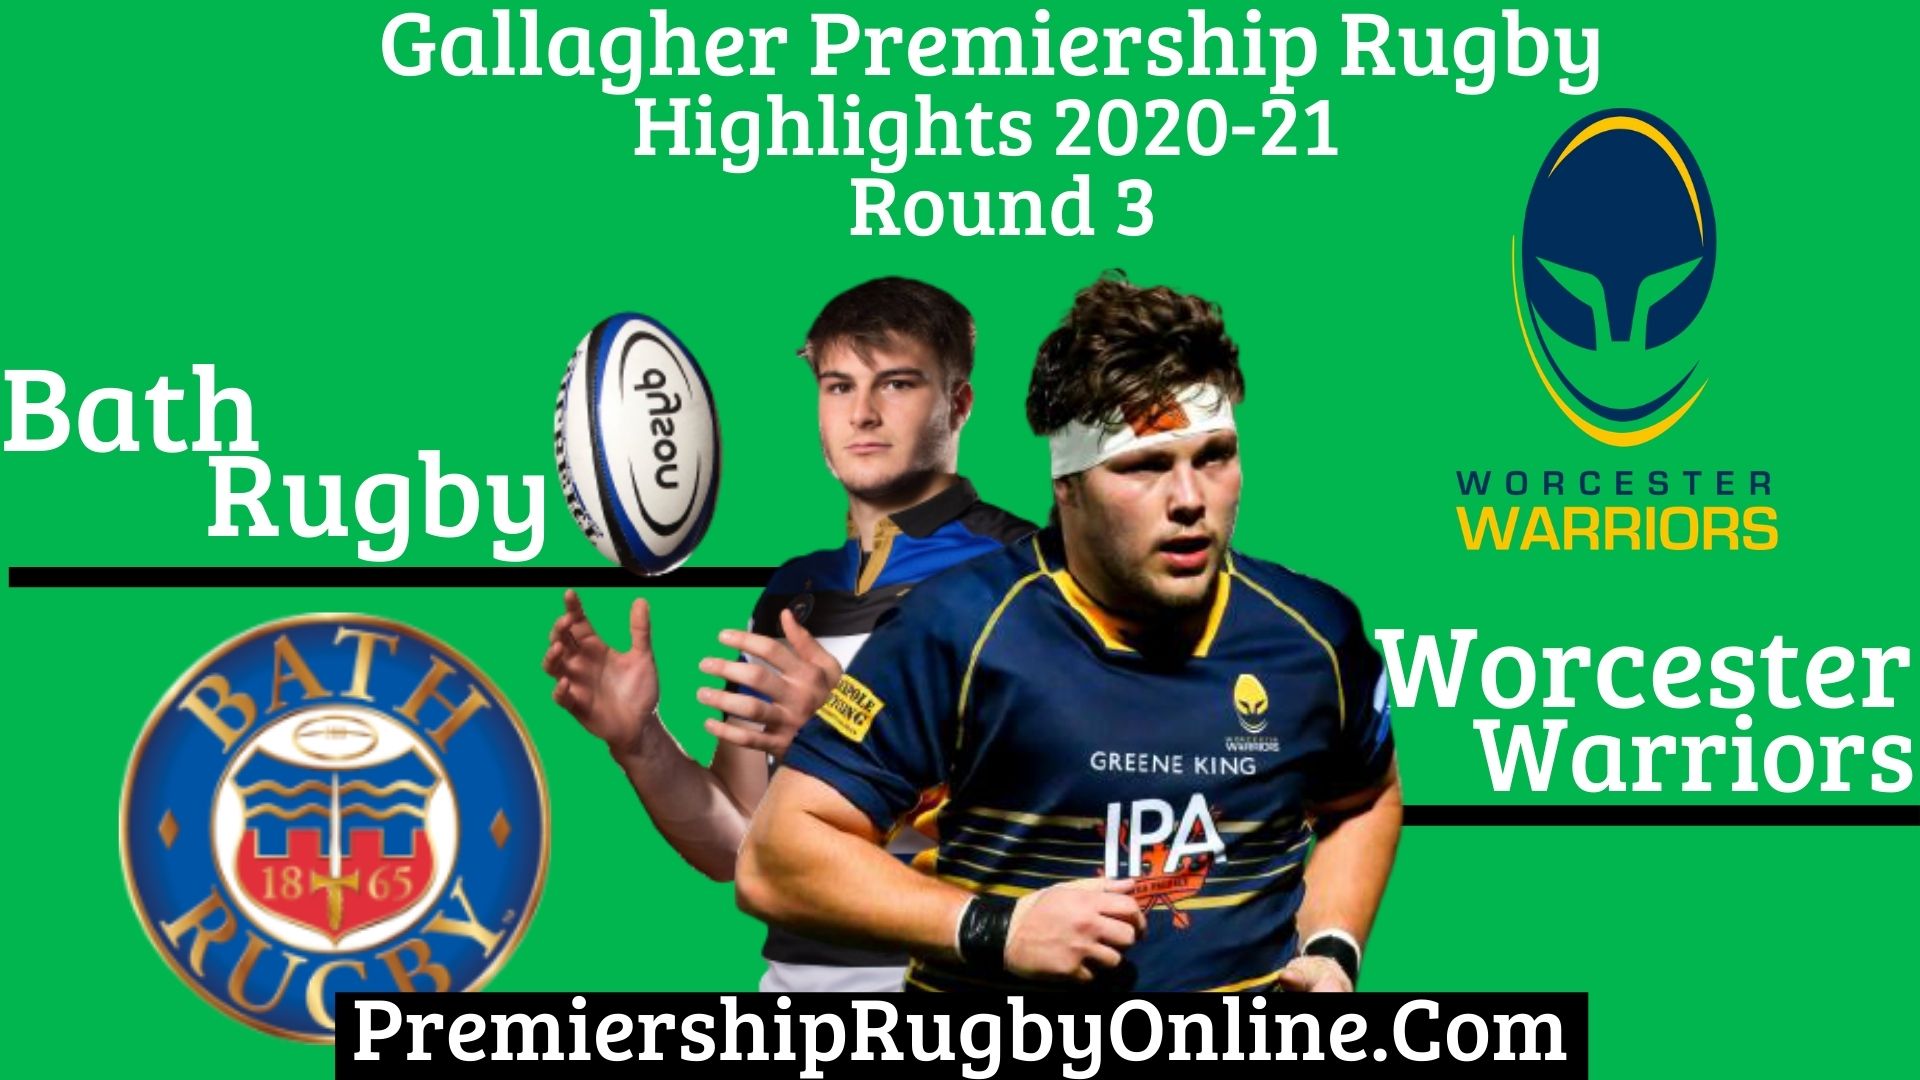 Worcester Warriors Vs Bath Rugby Highlights 2020 RD 3